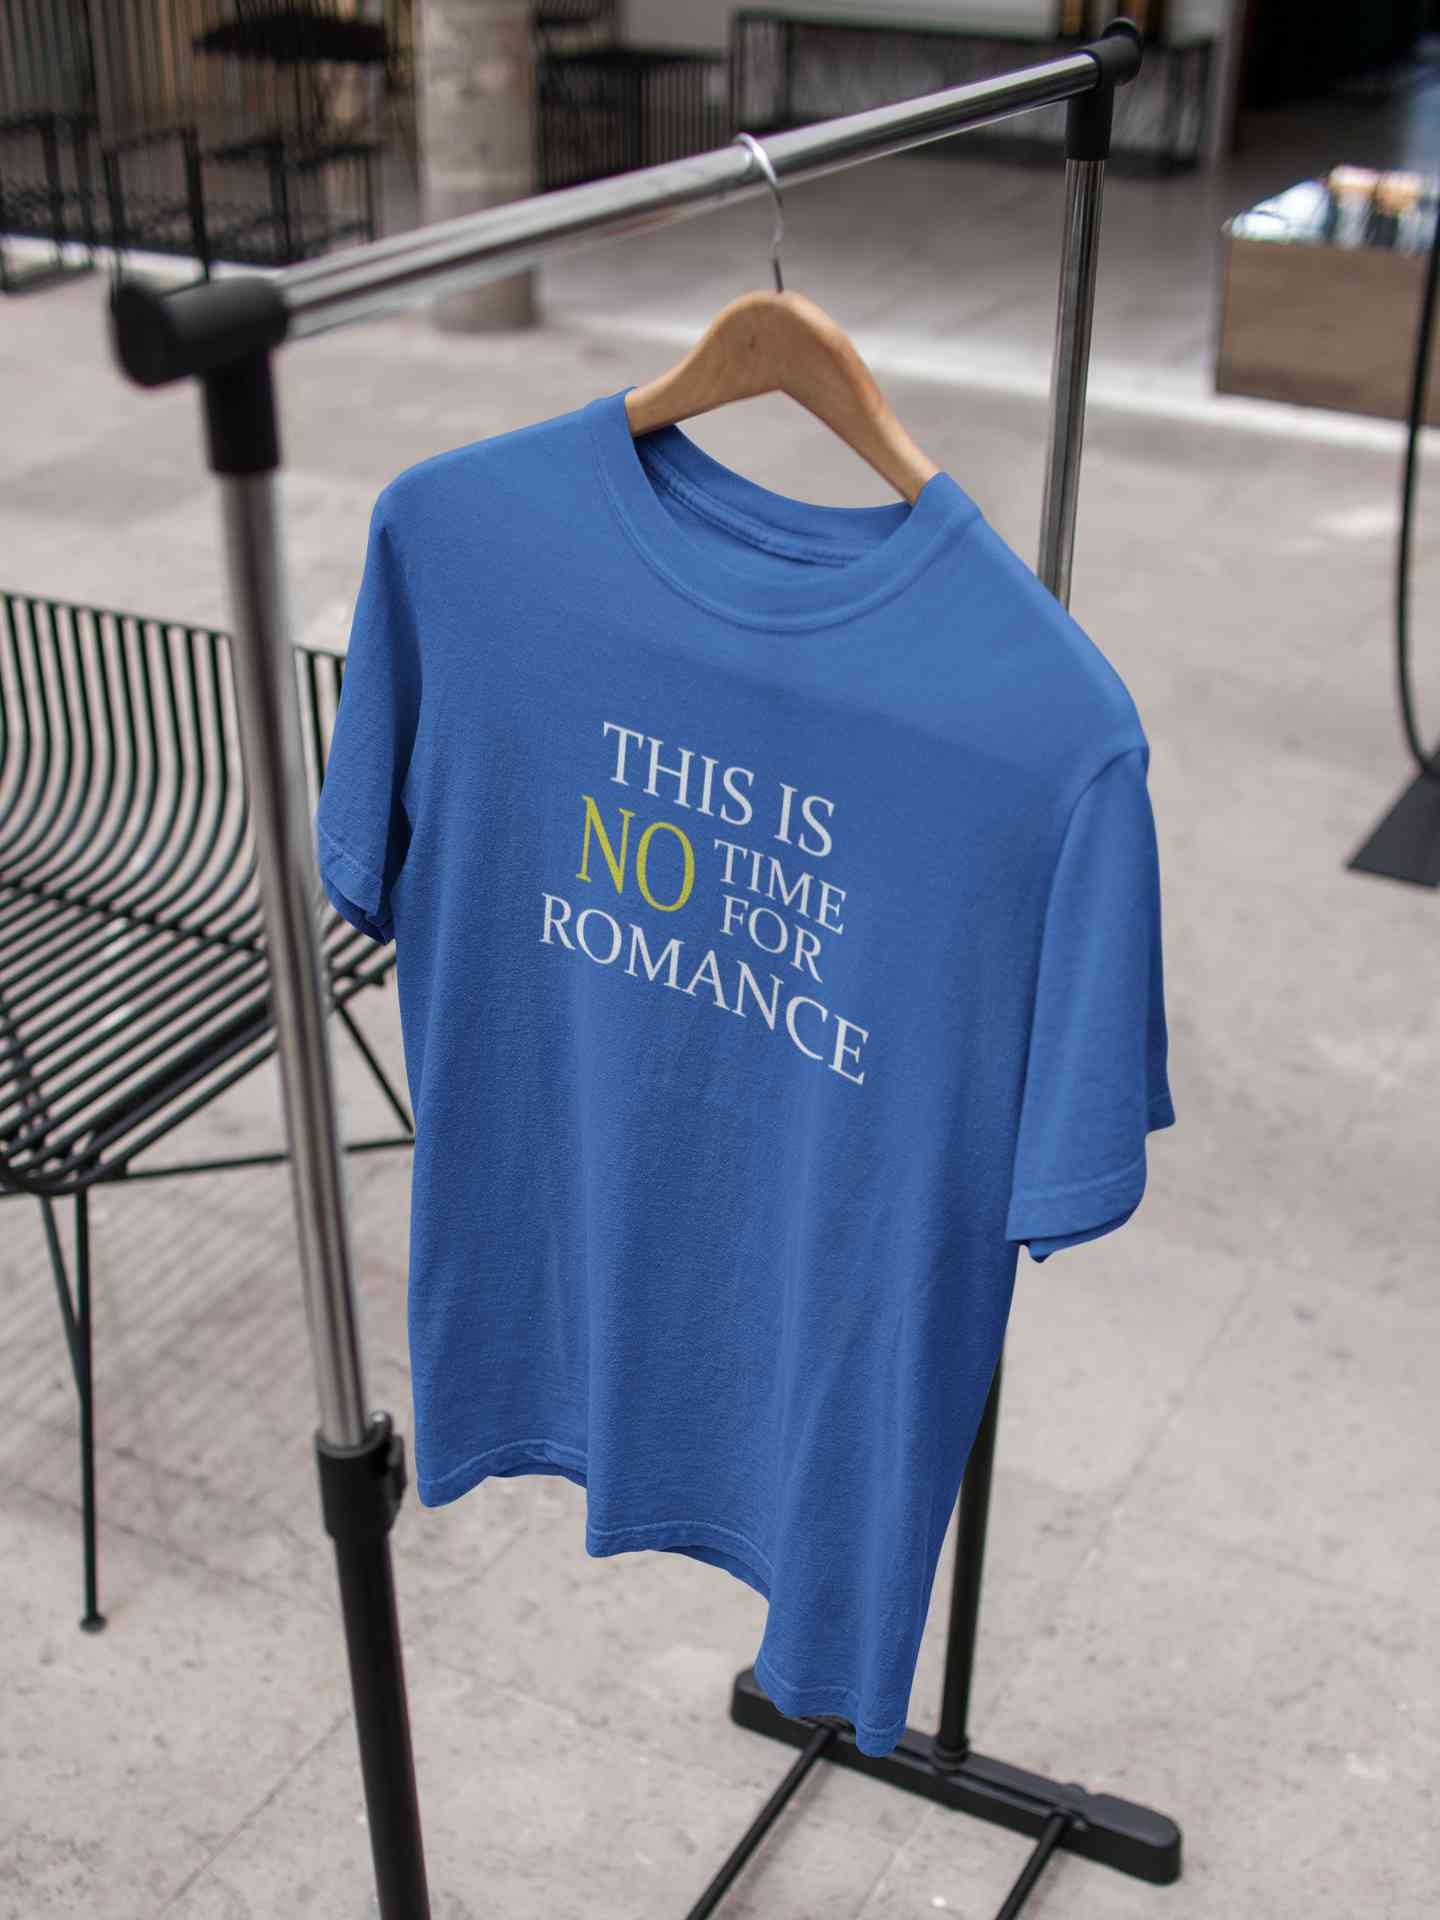 This Is Not Time For Romance Mens Half Sleeves T-shirt- FunkyTeesClub